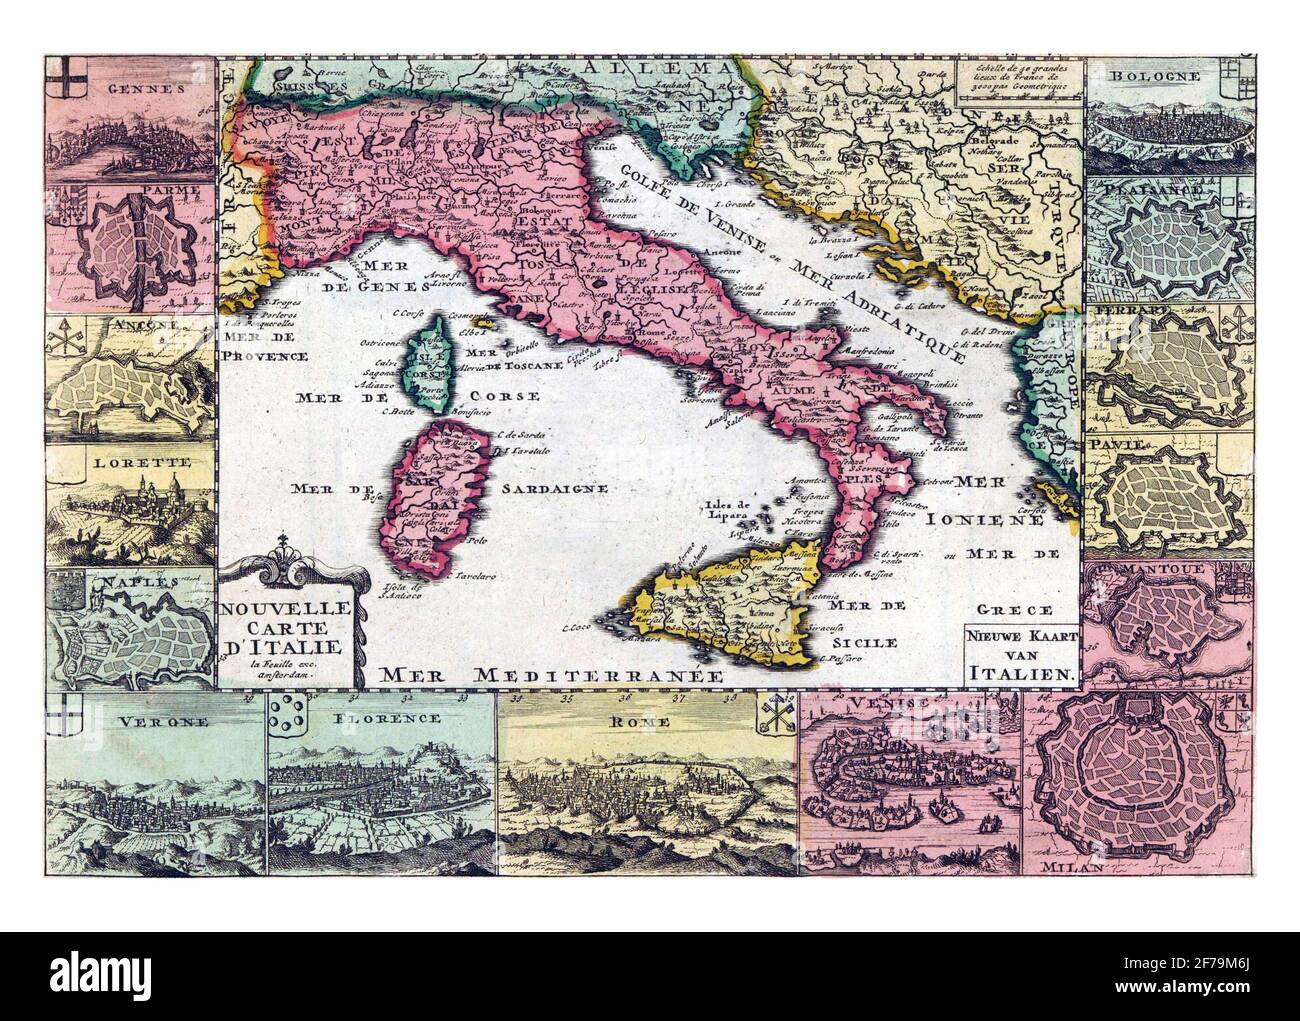 Map of Italy, vintage engraving. Stock Photo